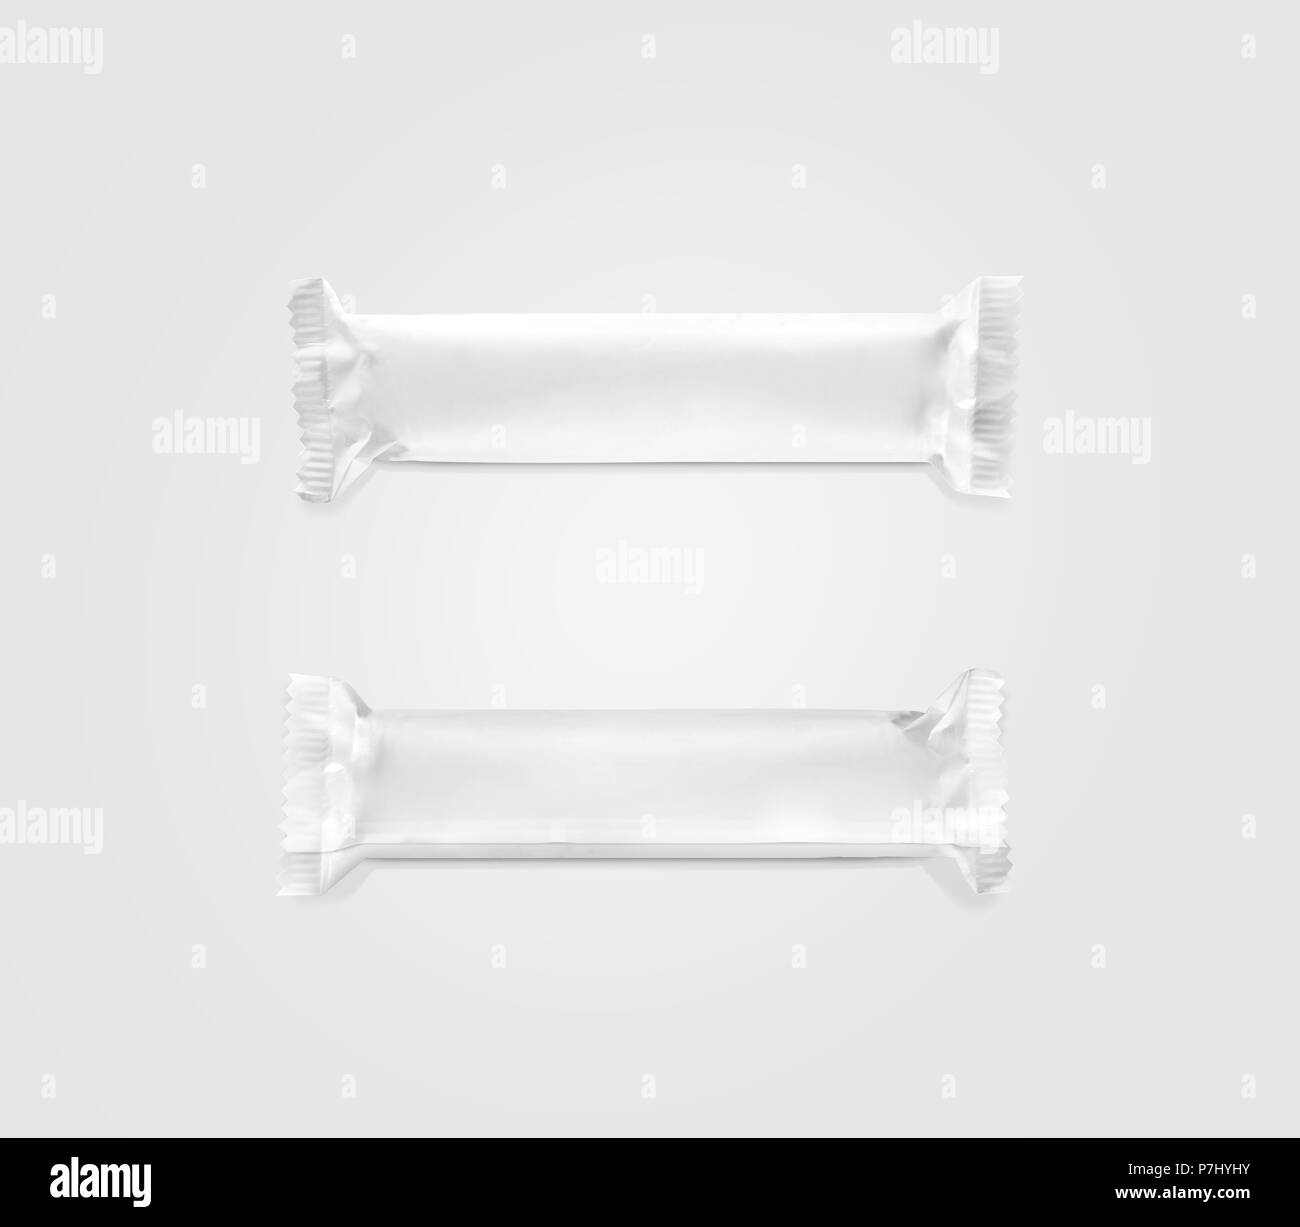 Leere weiße Candy Bar Plastikverpackung mockup Oberseite und With Blank Candy Bar Wrapper Template